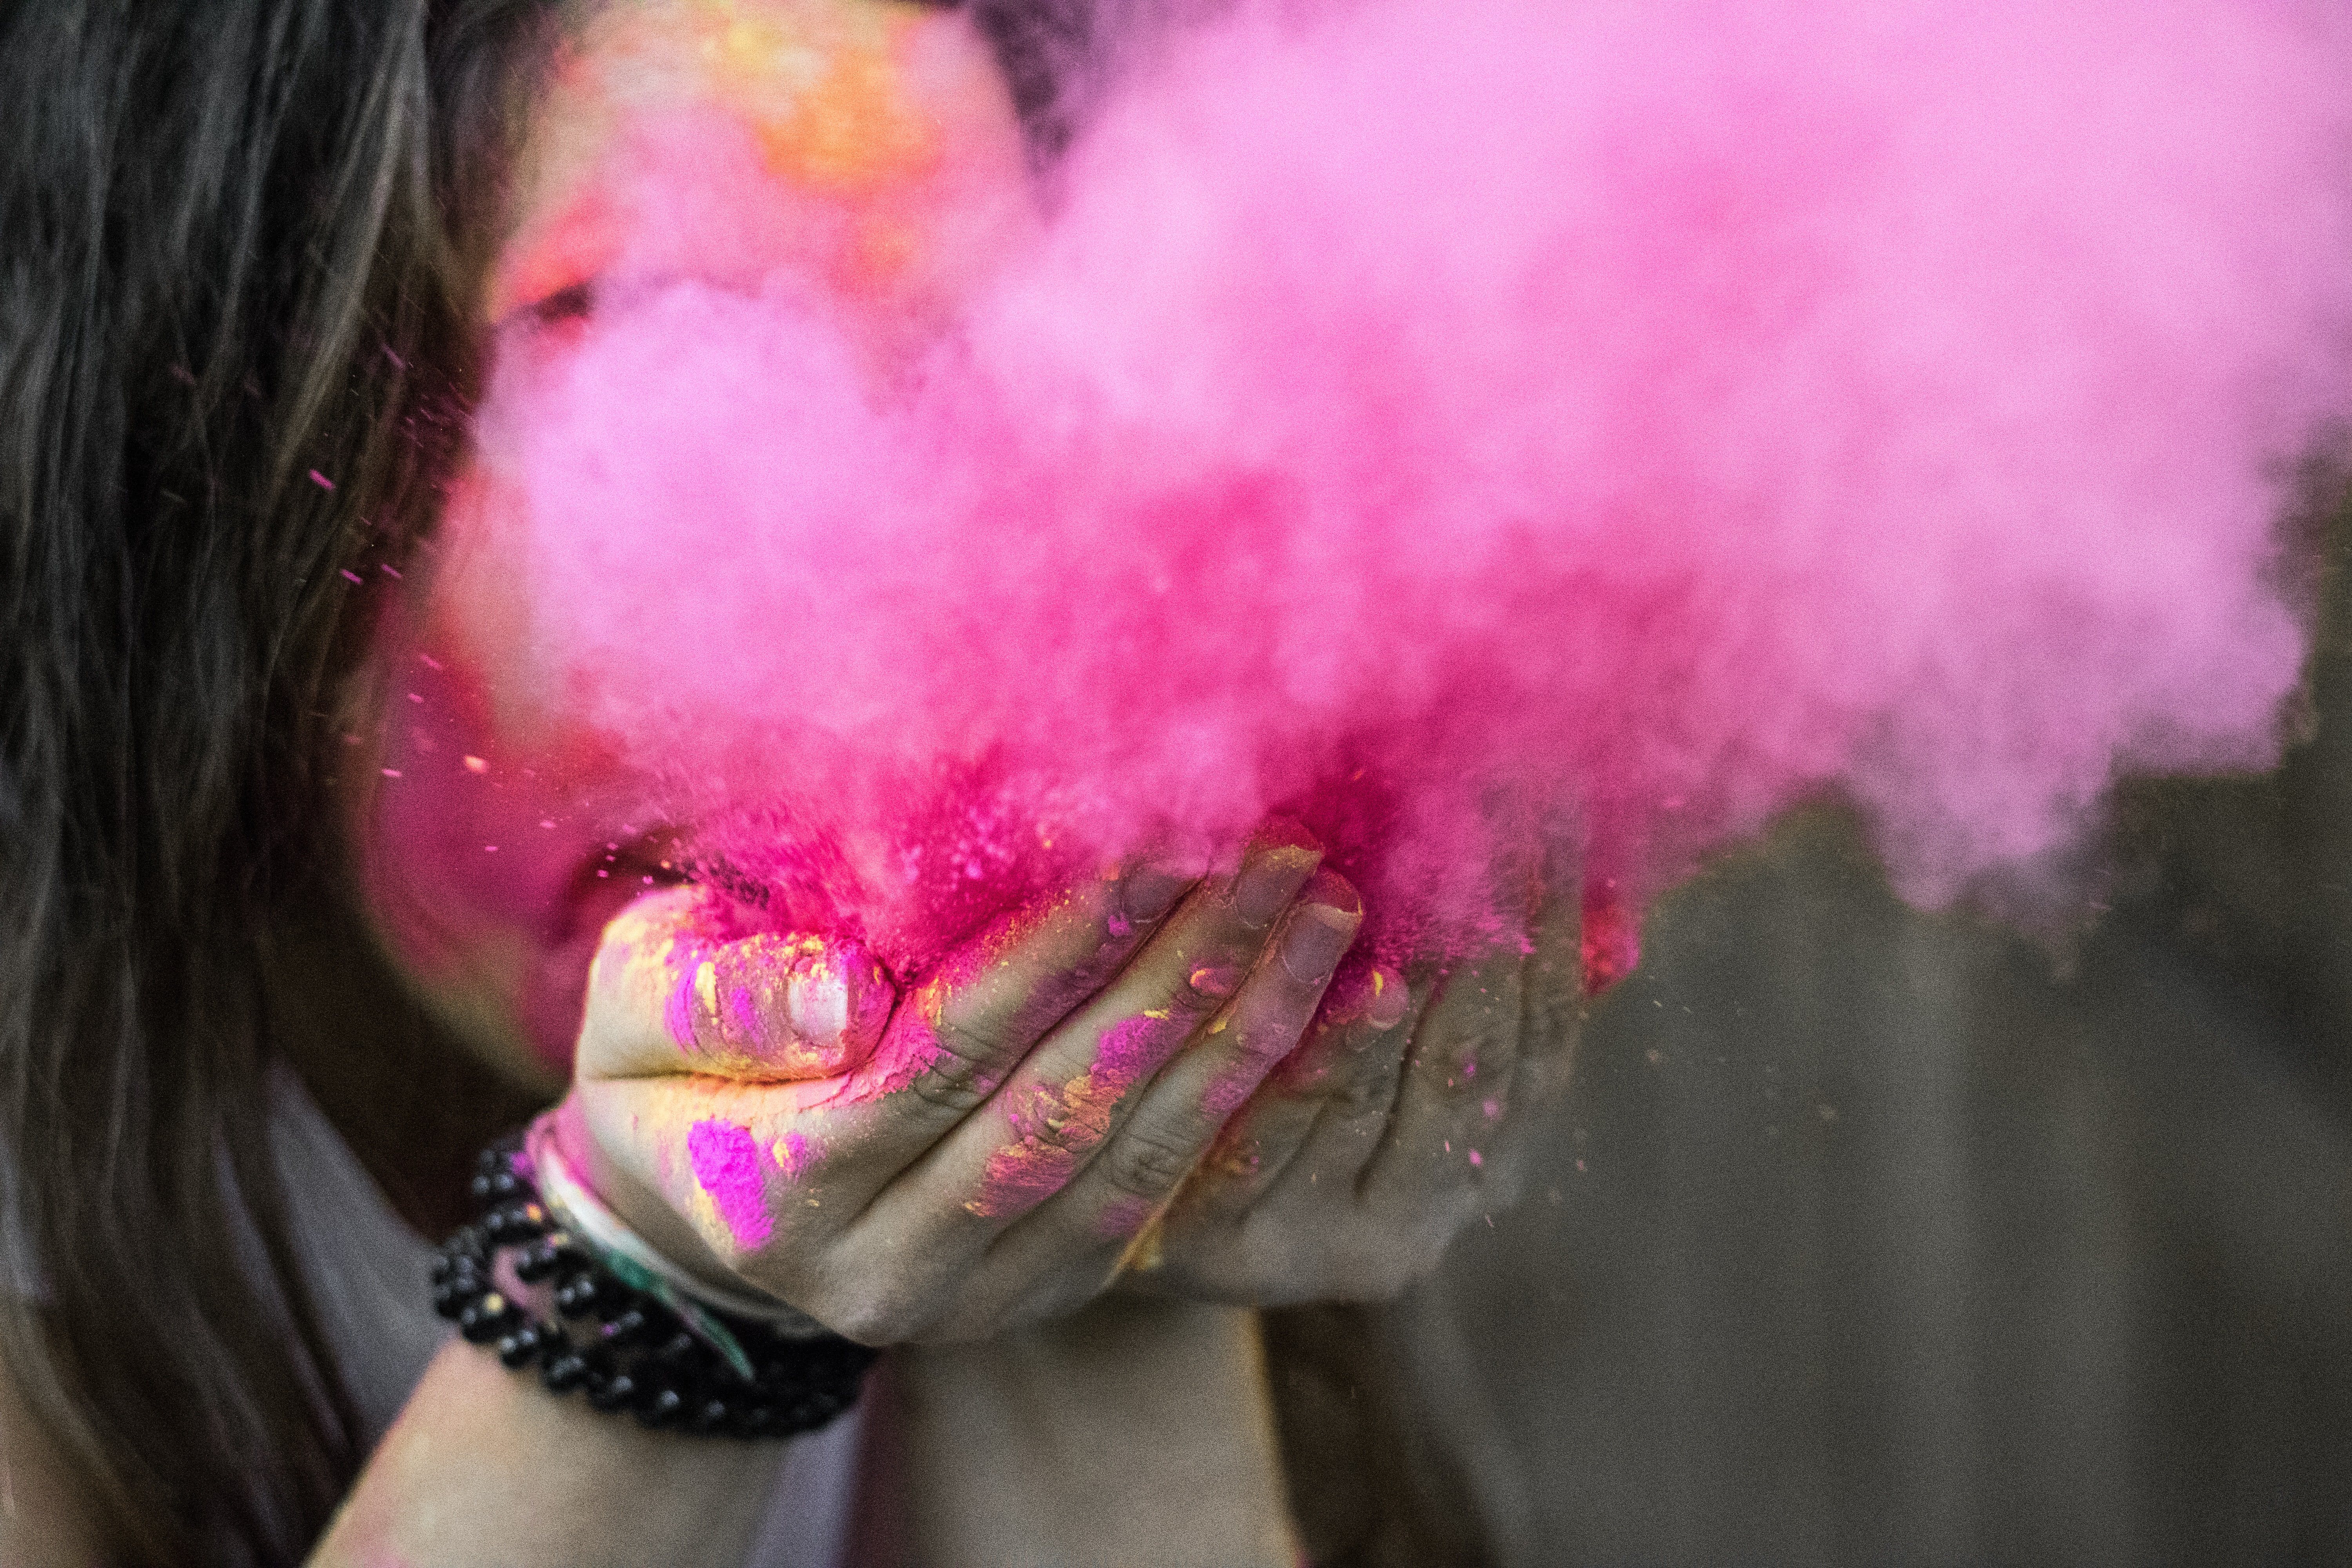 A girl blowing out pink powder so that it creates a pink smoke cloud